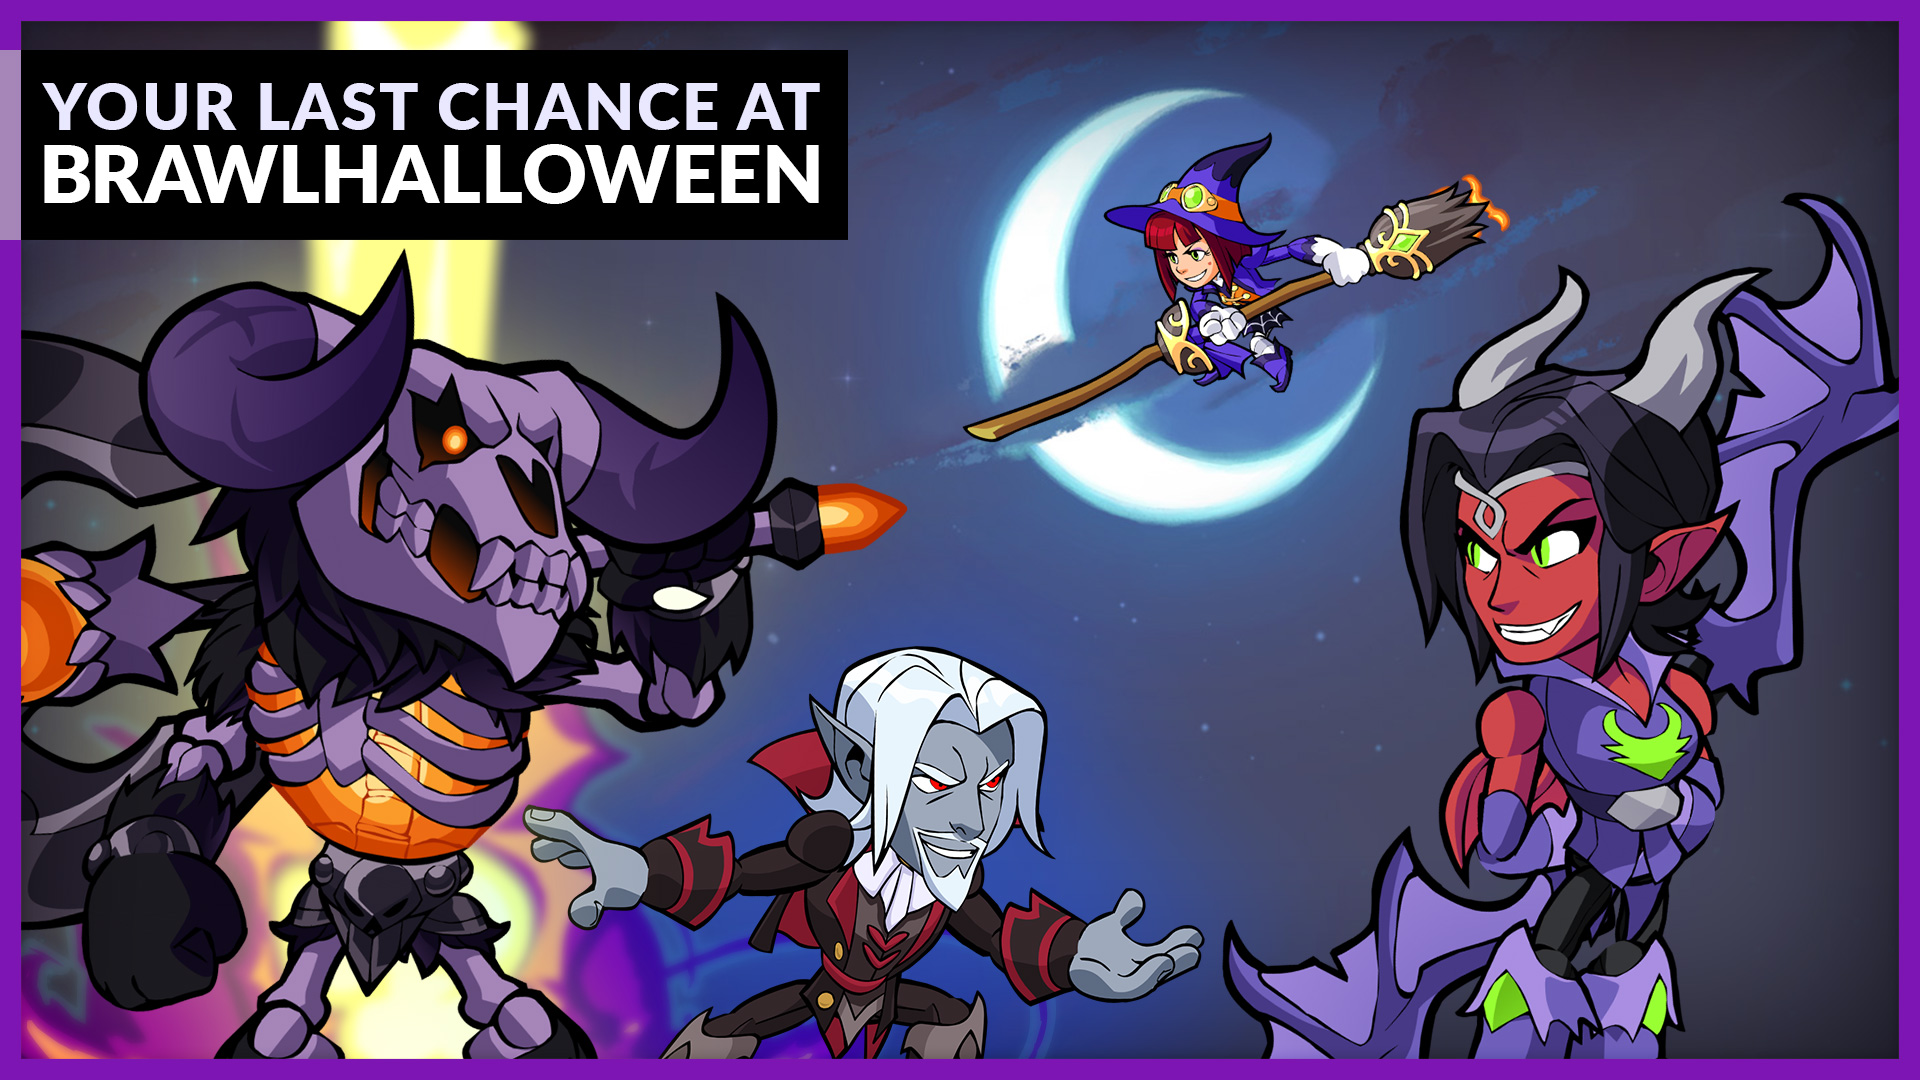 Brawlhalloween 2020 is Almost Gone!